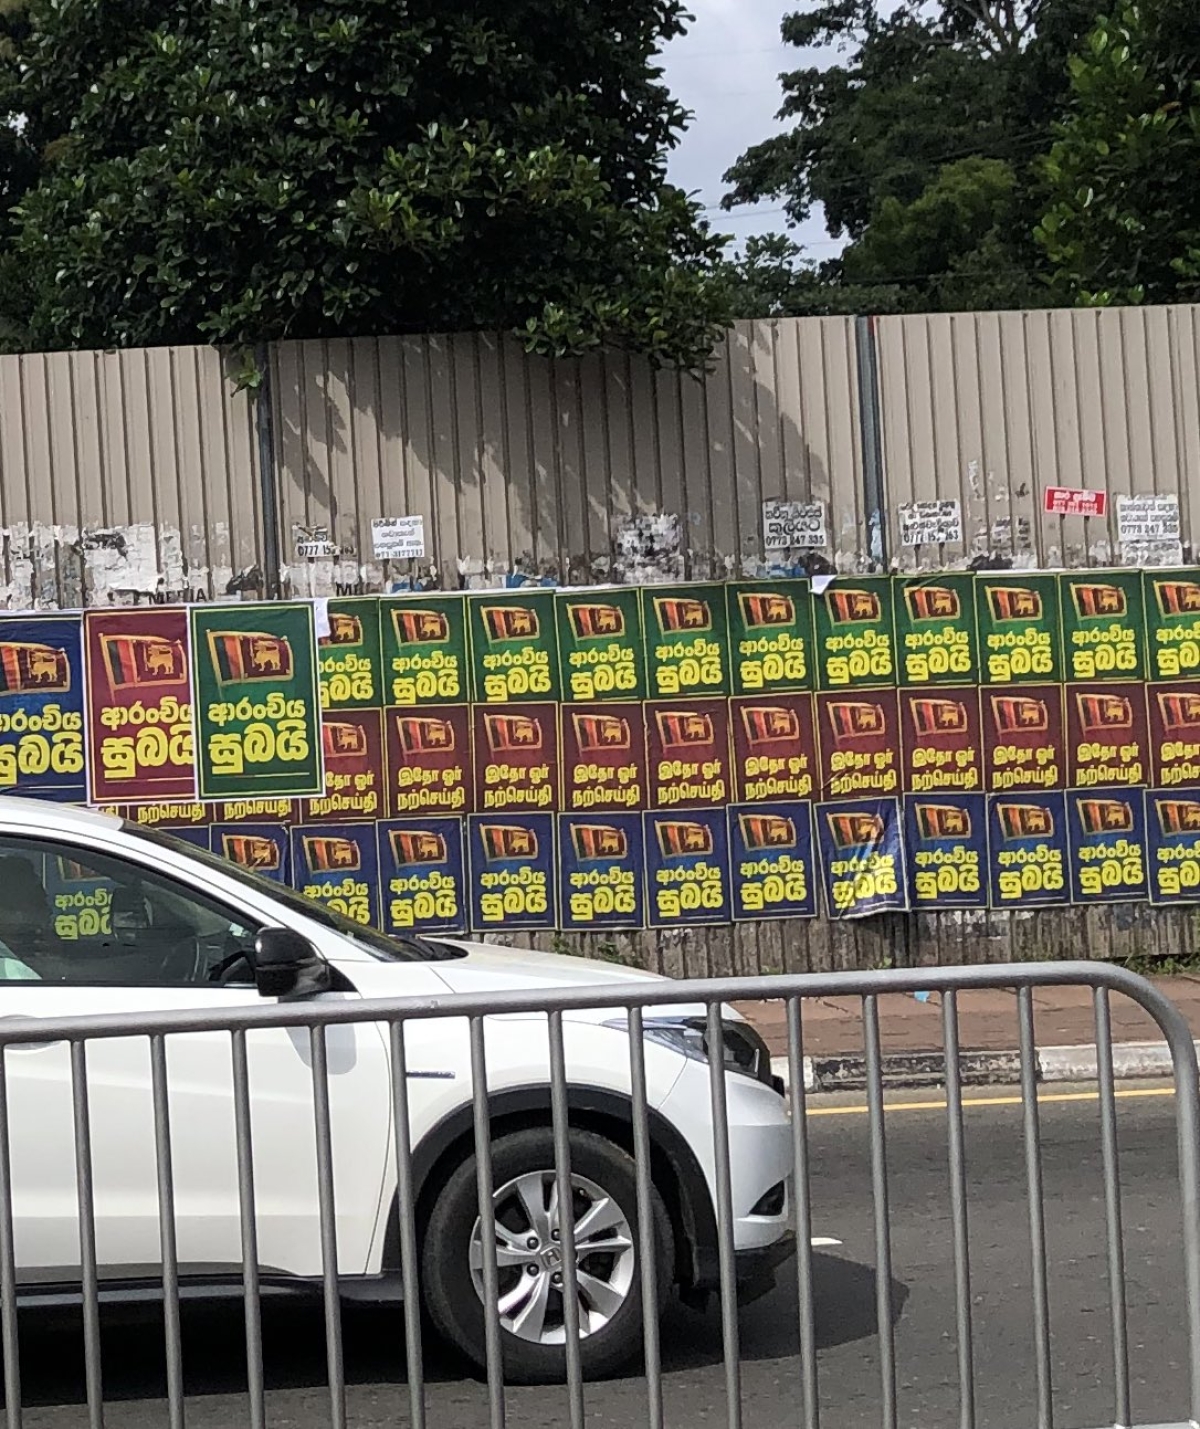 Poster Campaign &quot;Expect Good News&quot; Signals Major Announcement by President on Ending Sri Lanka&#039;s Bankruptcy